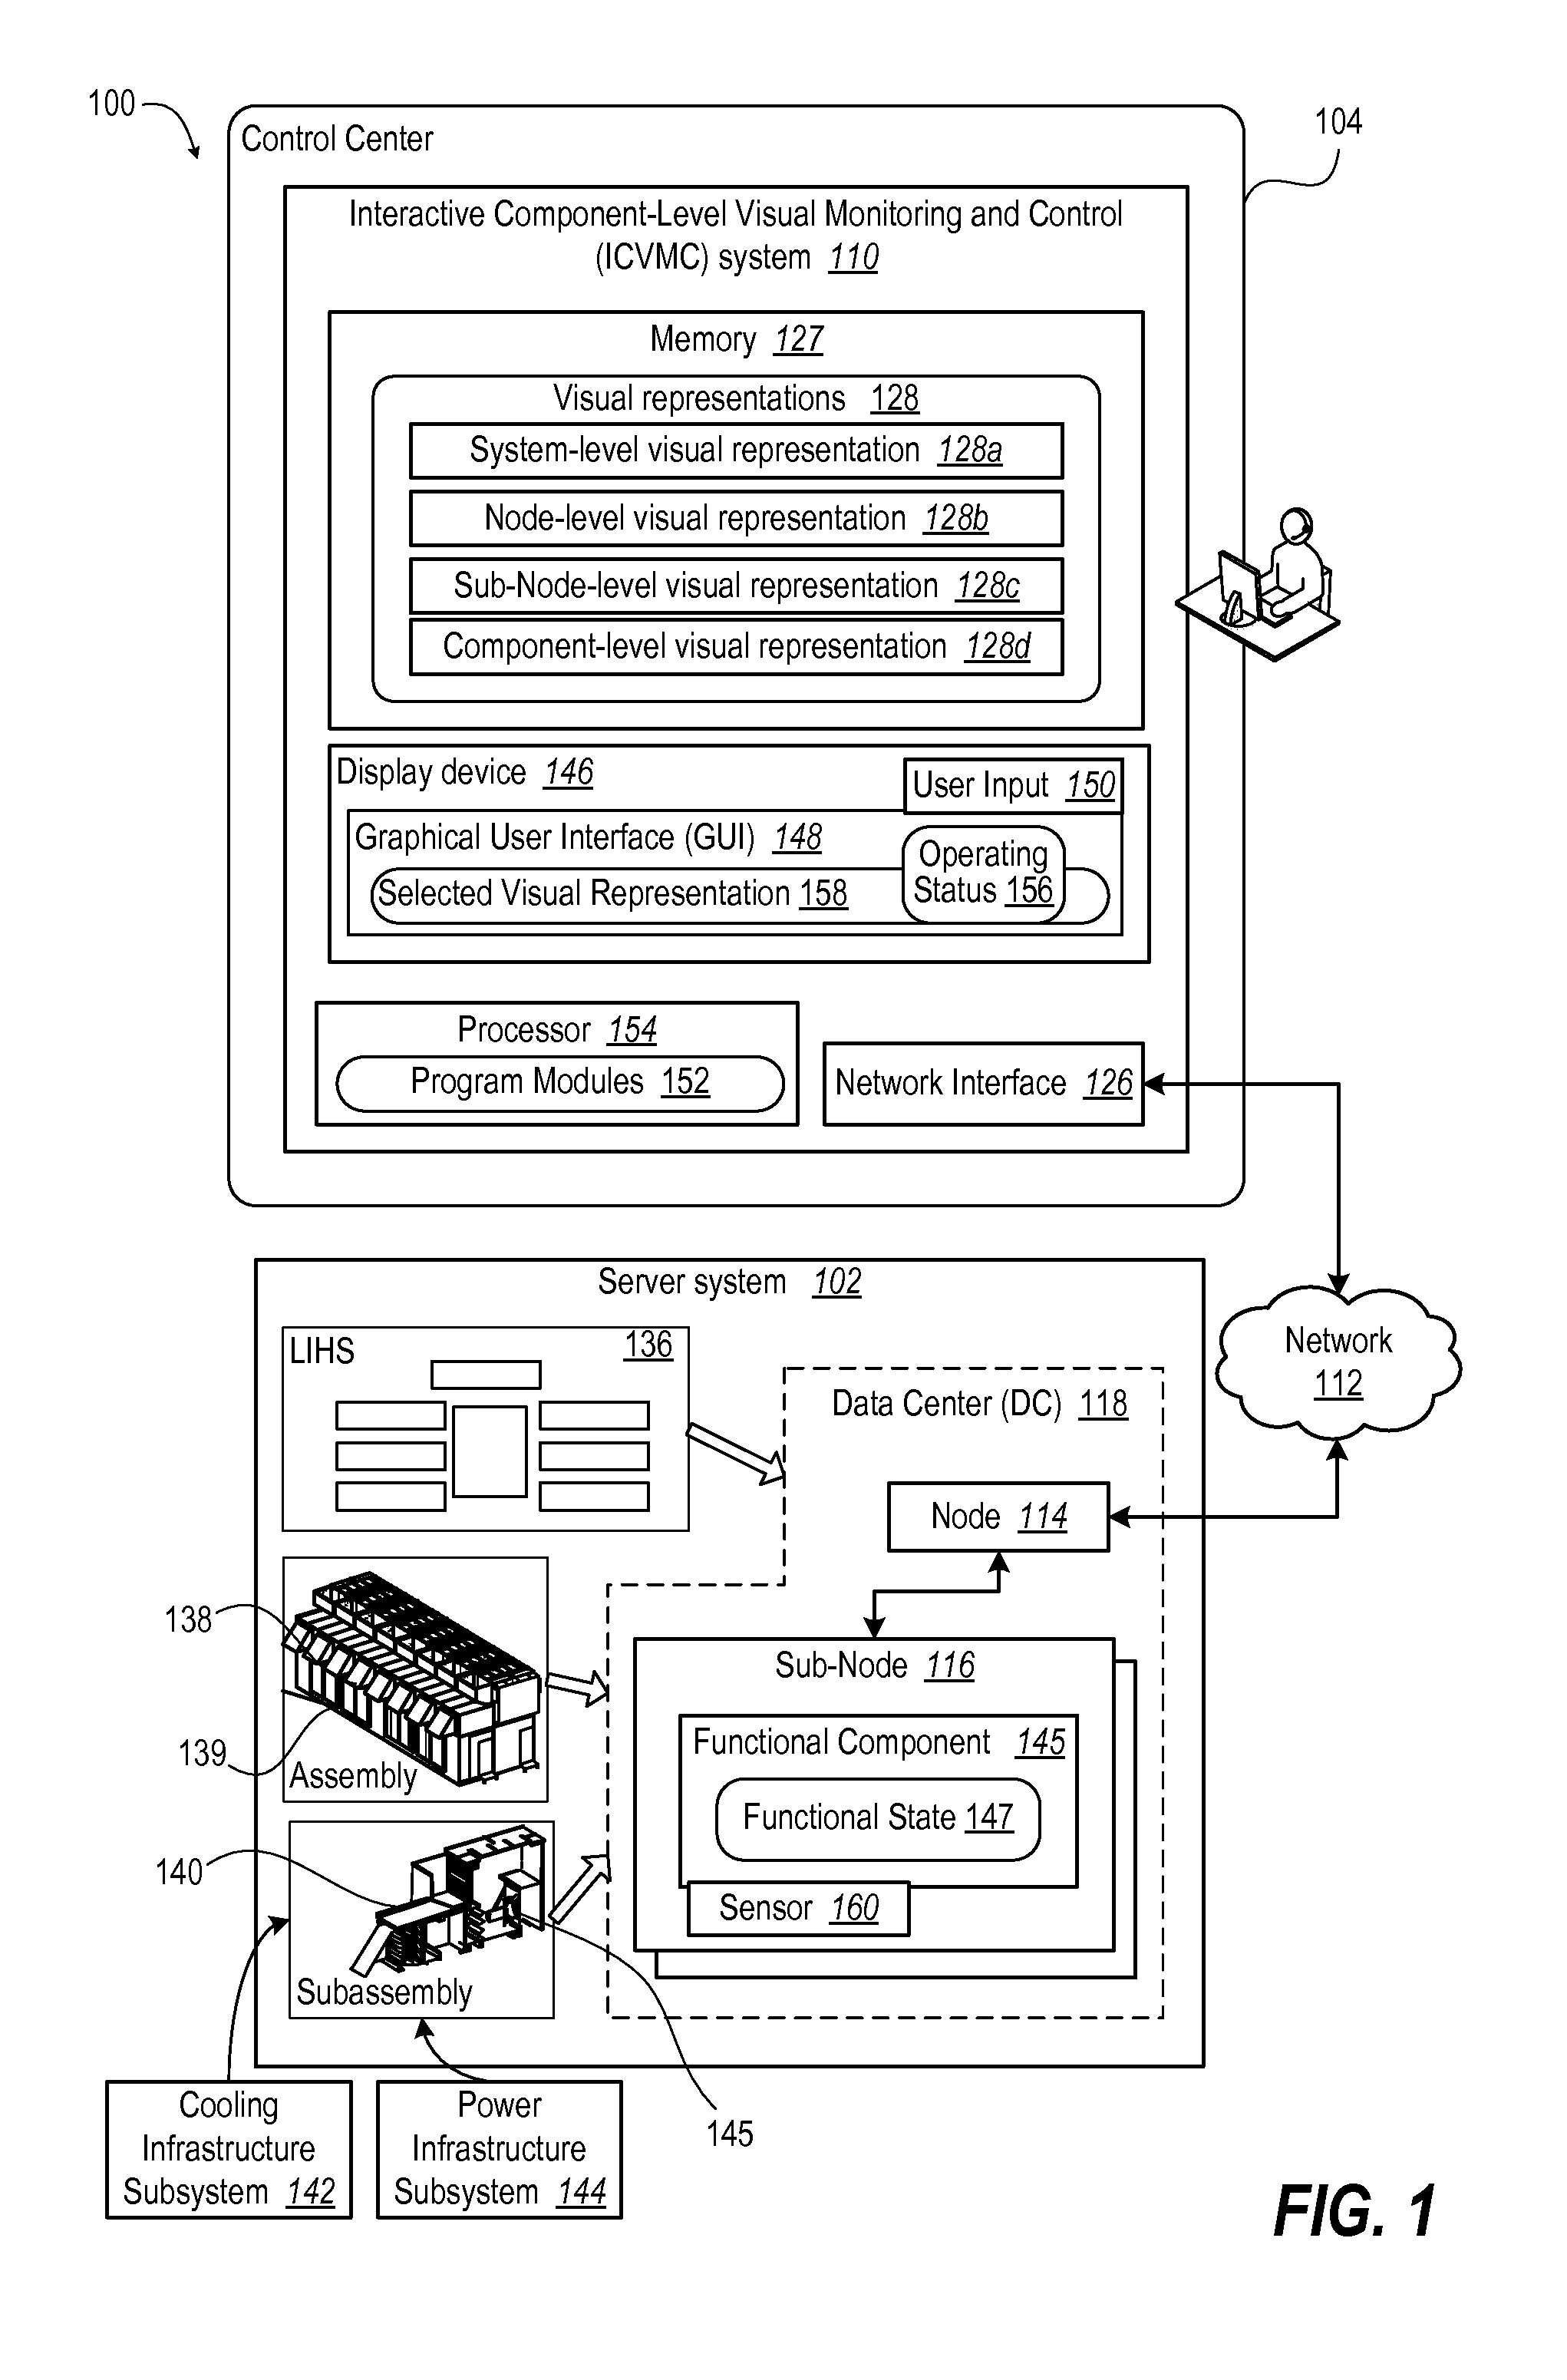 Method and information handling system providing an interactive interface for device-level monitoring and servicing of data center